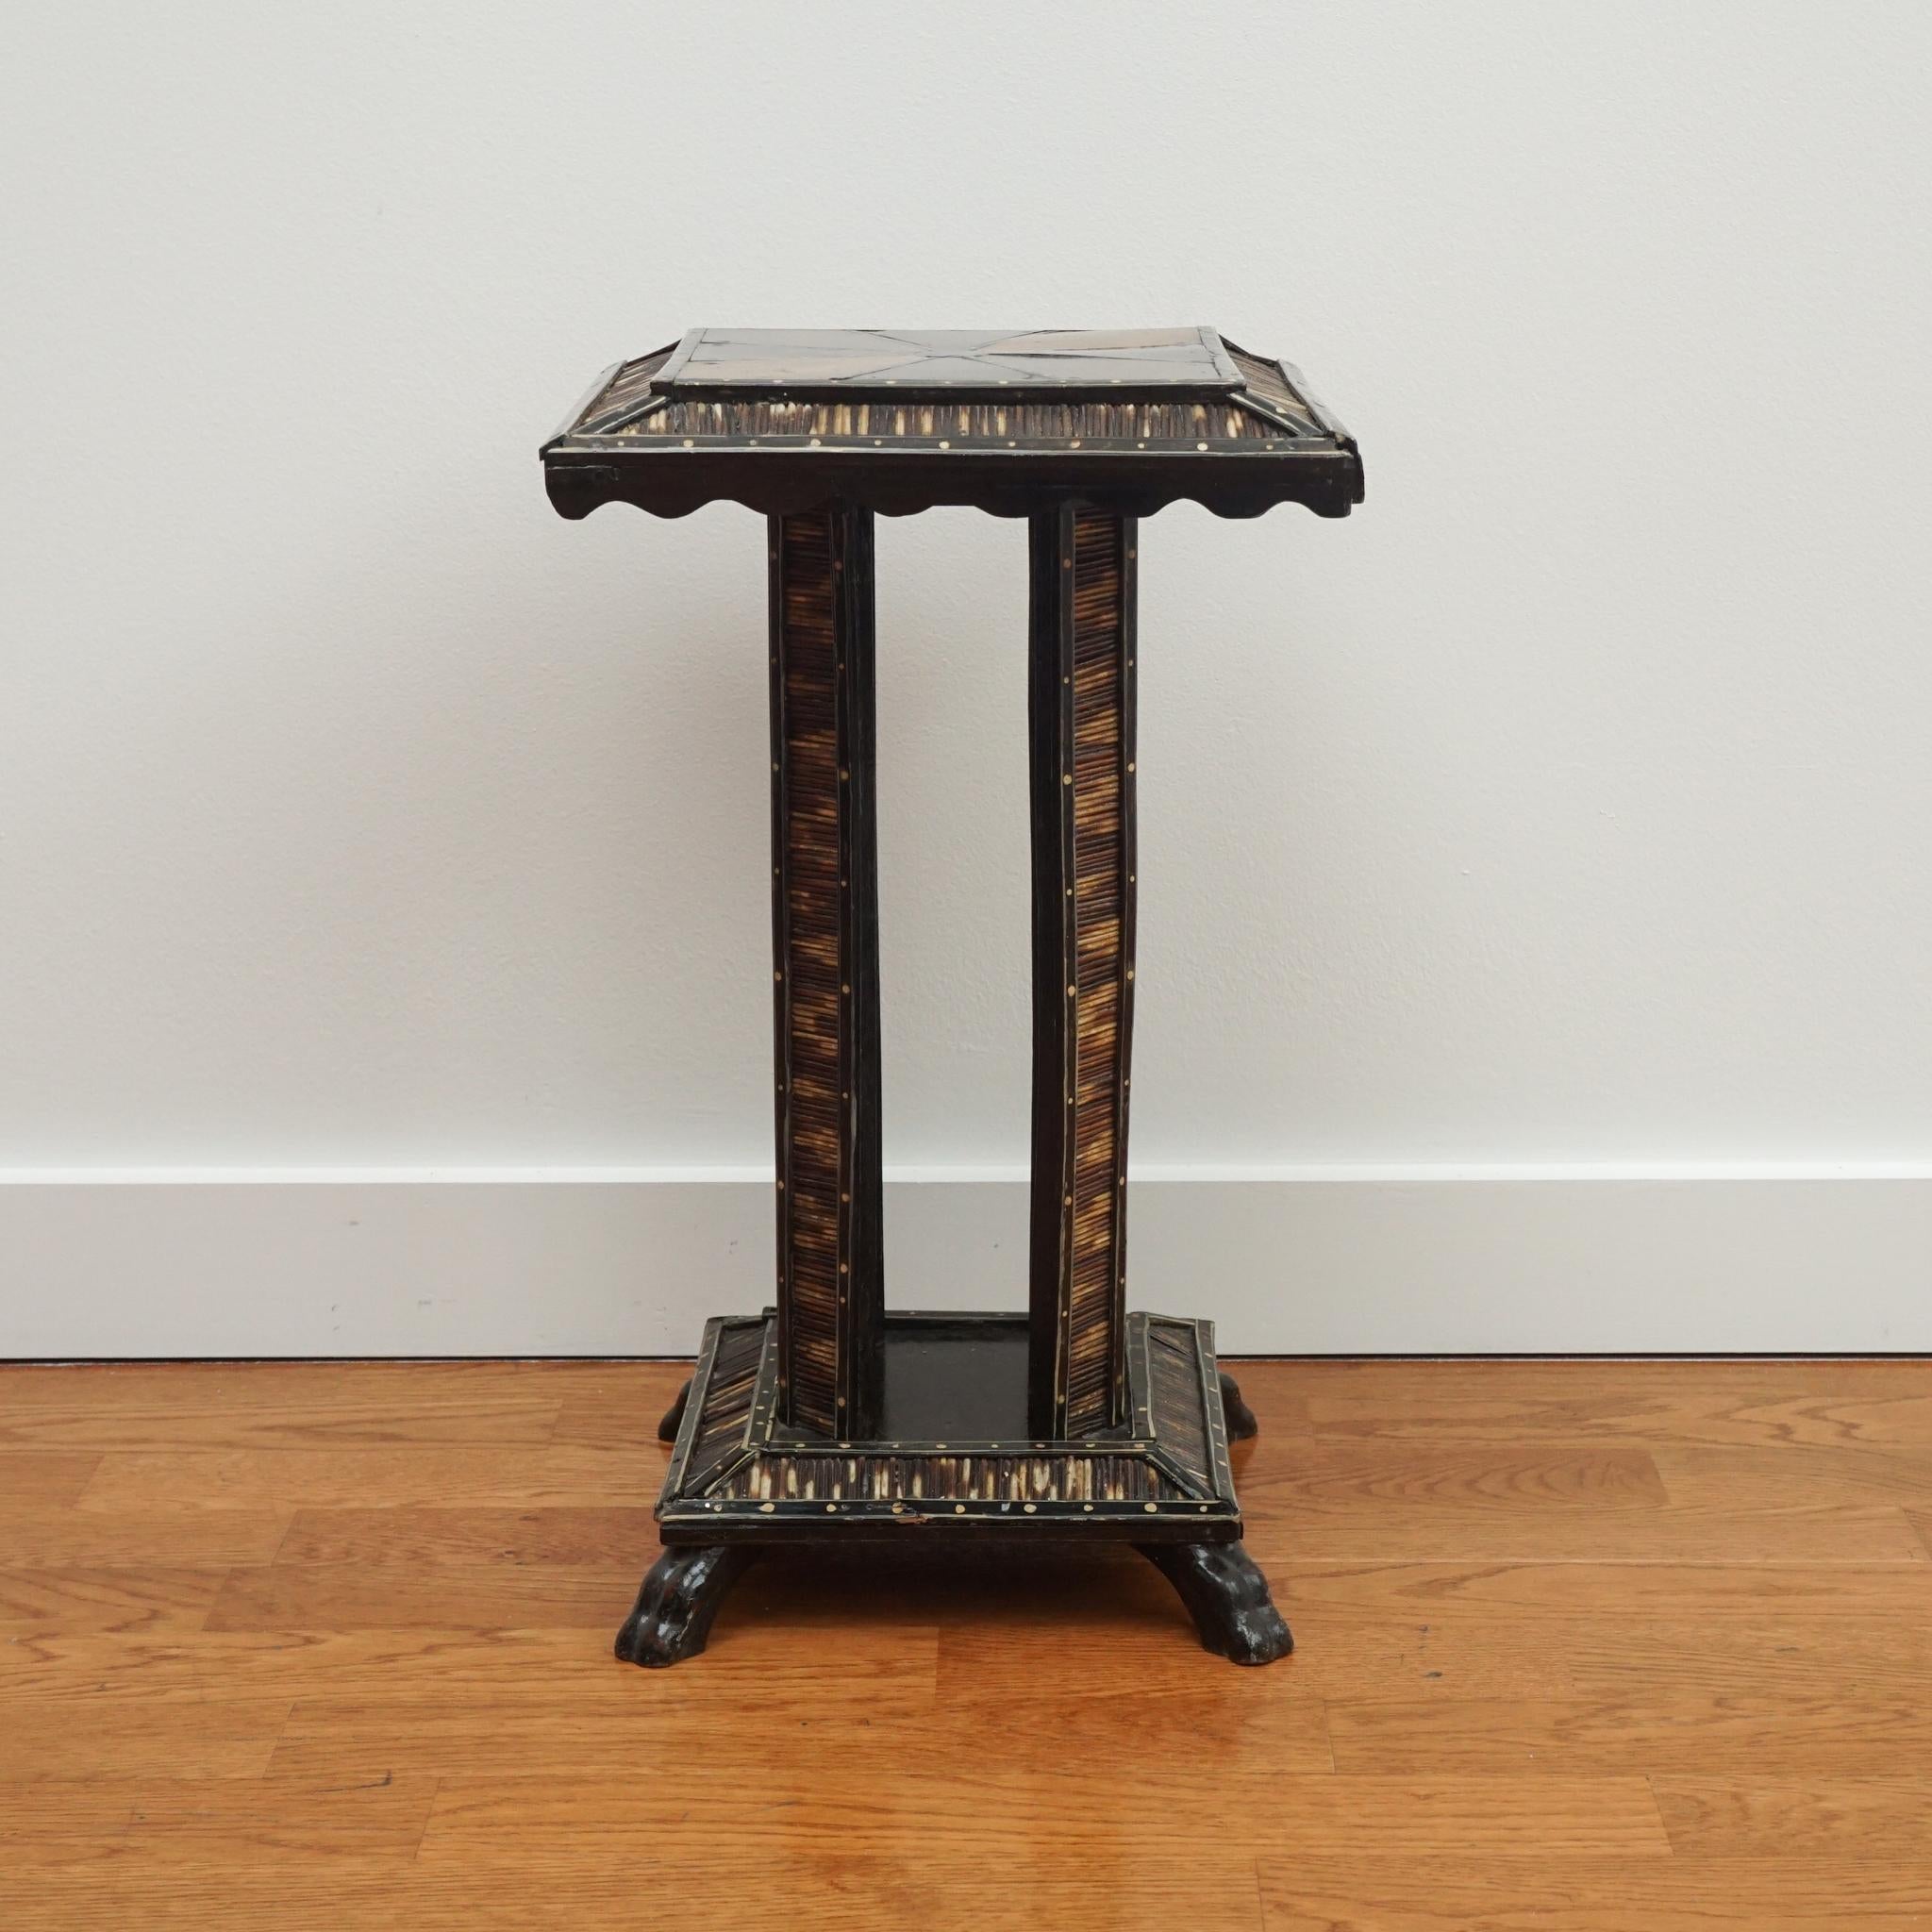 This small-scale antique accent table is from the Sandra Long Collection of Anglo-Indian treasures. Combining ebony wood, ivory dots and tropical wood inlays, the square top table is detailed top to bottom in porcupine quills. The table is newly